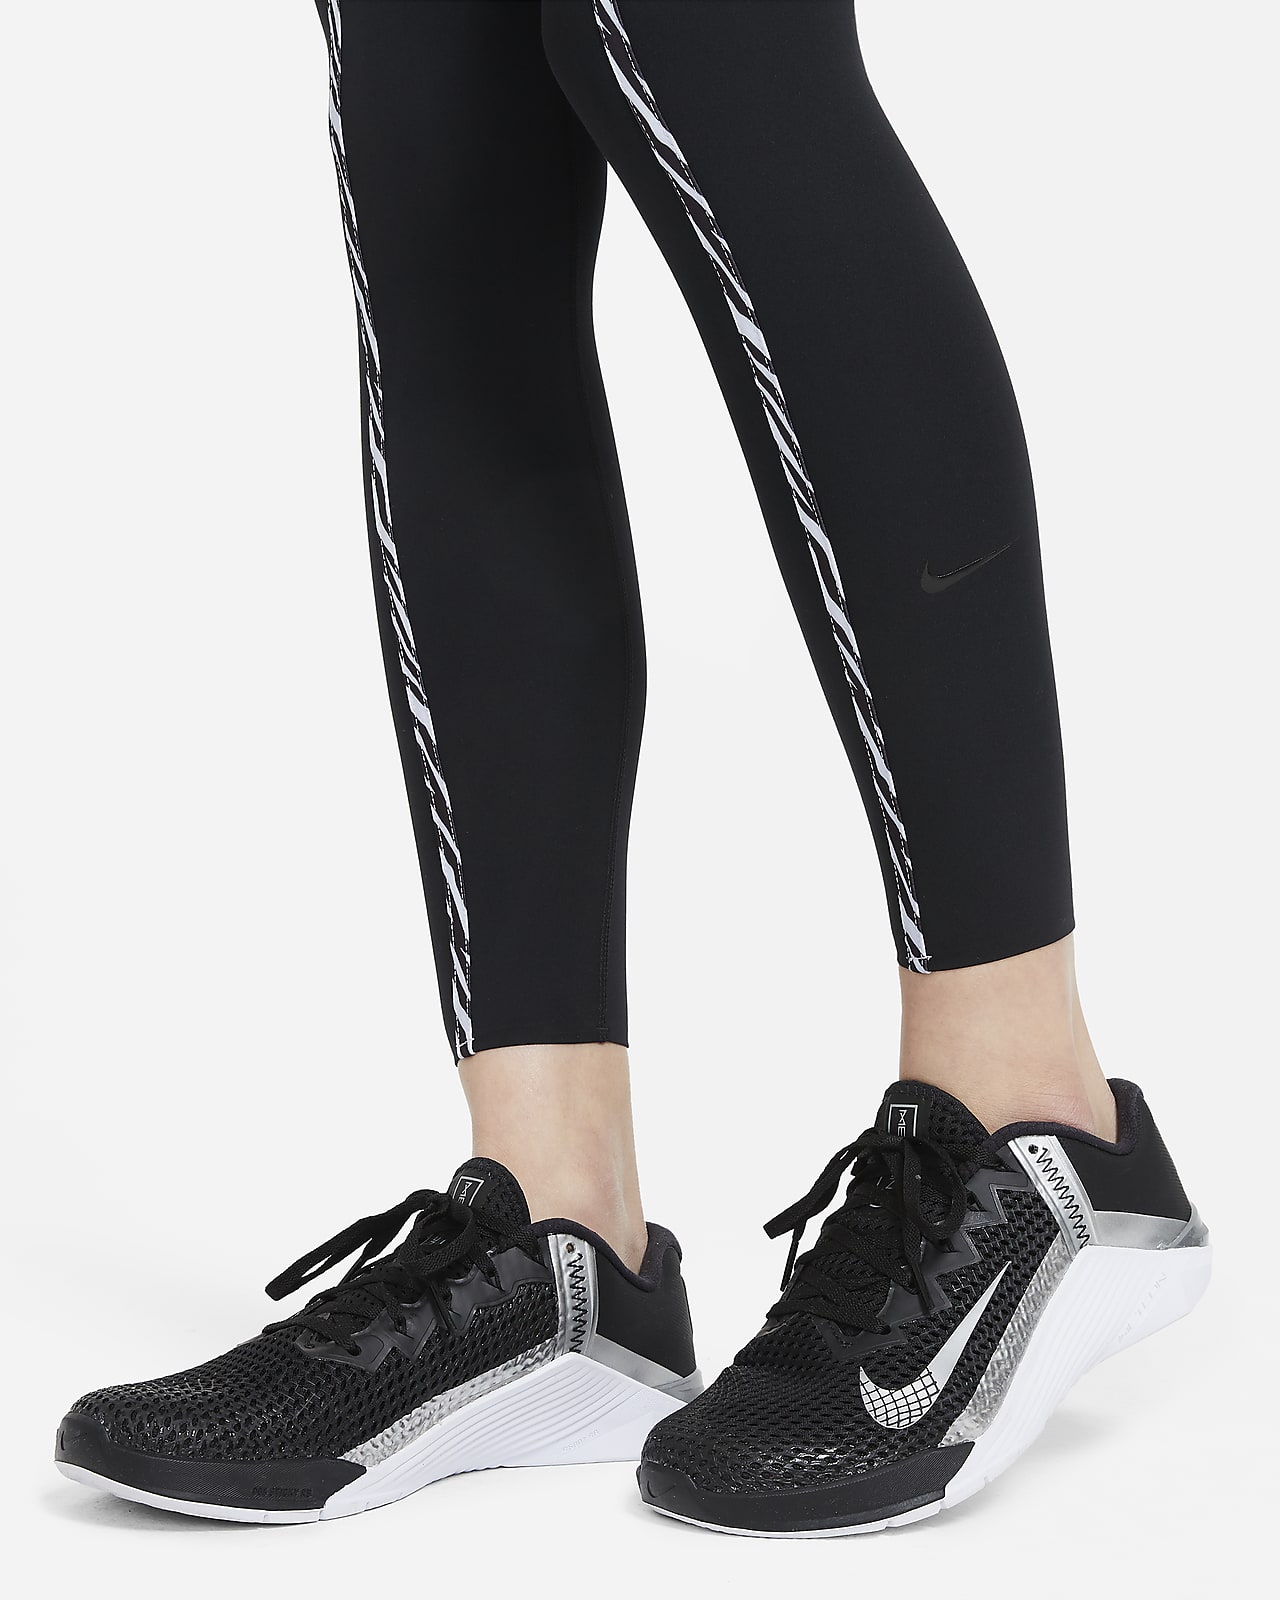 nike training icon clash one tight luxe leggings in black